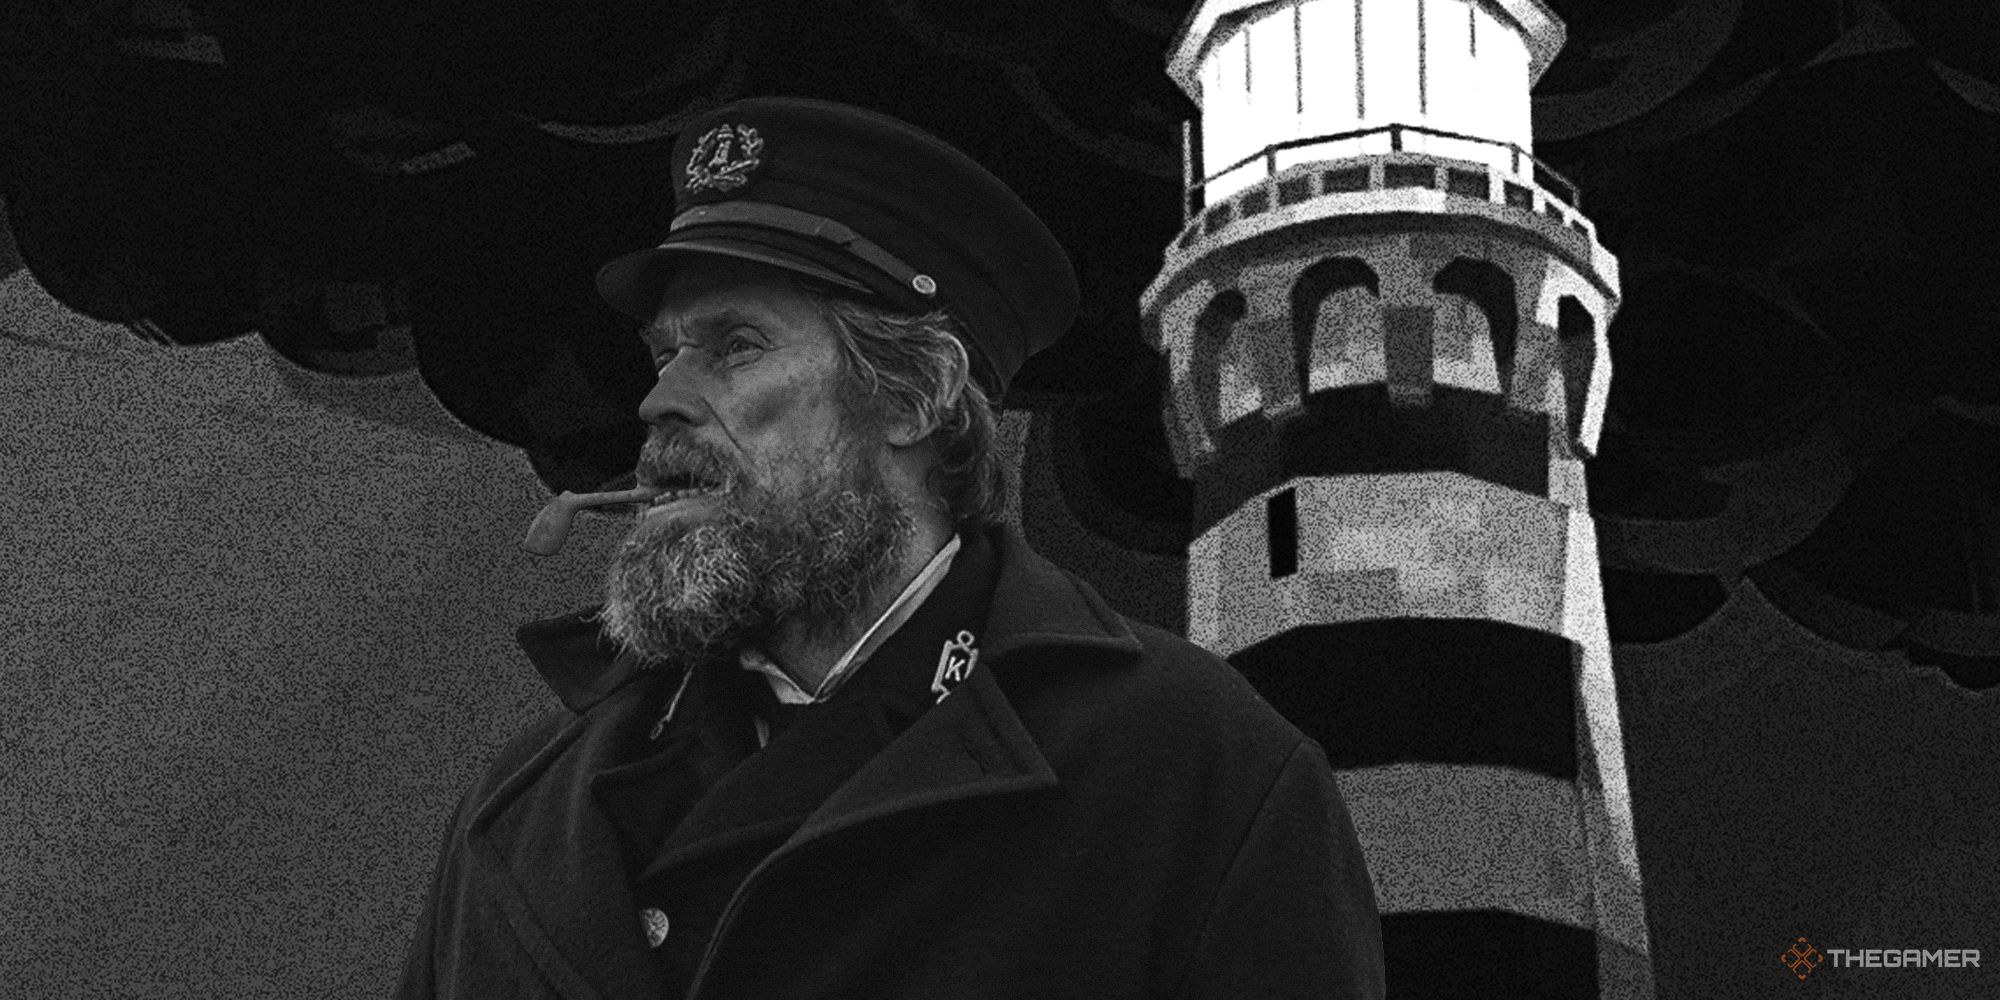 Willem Dafoe in front of the lighthouse from Dredge in black and white